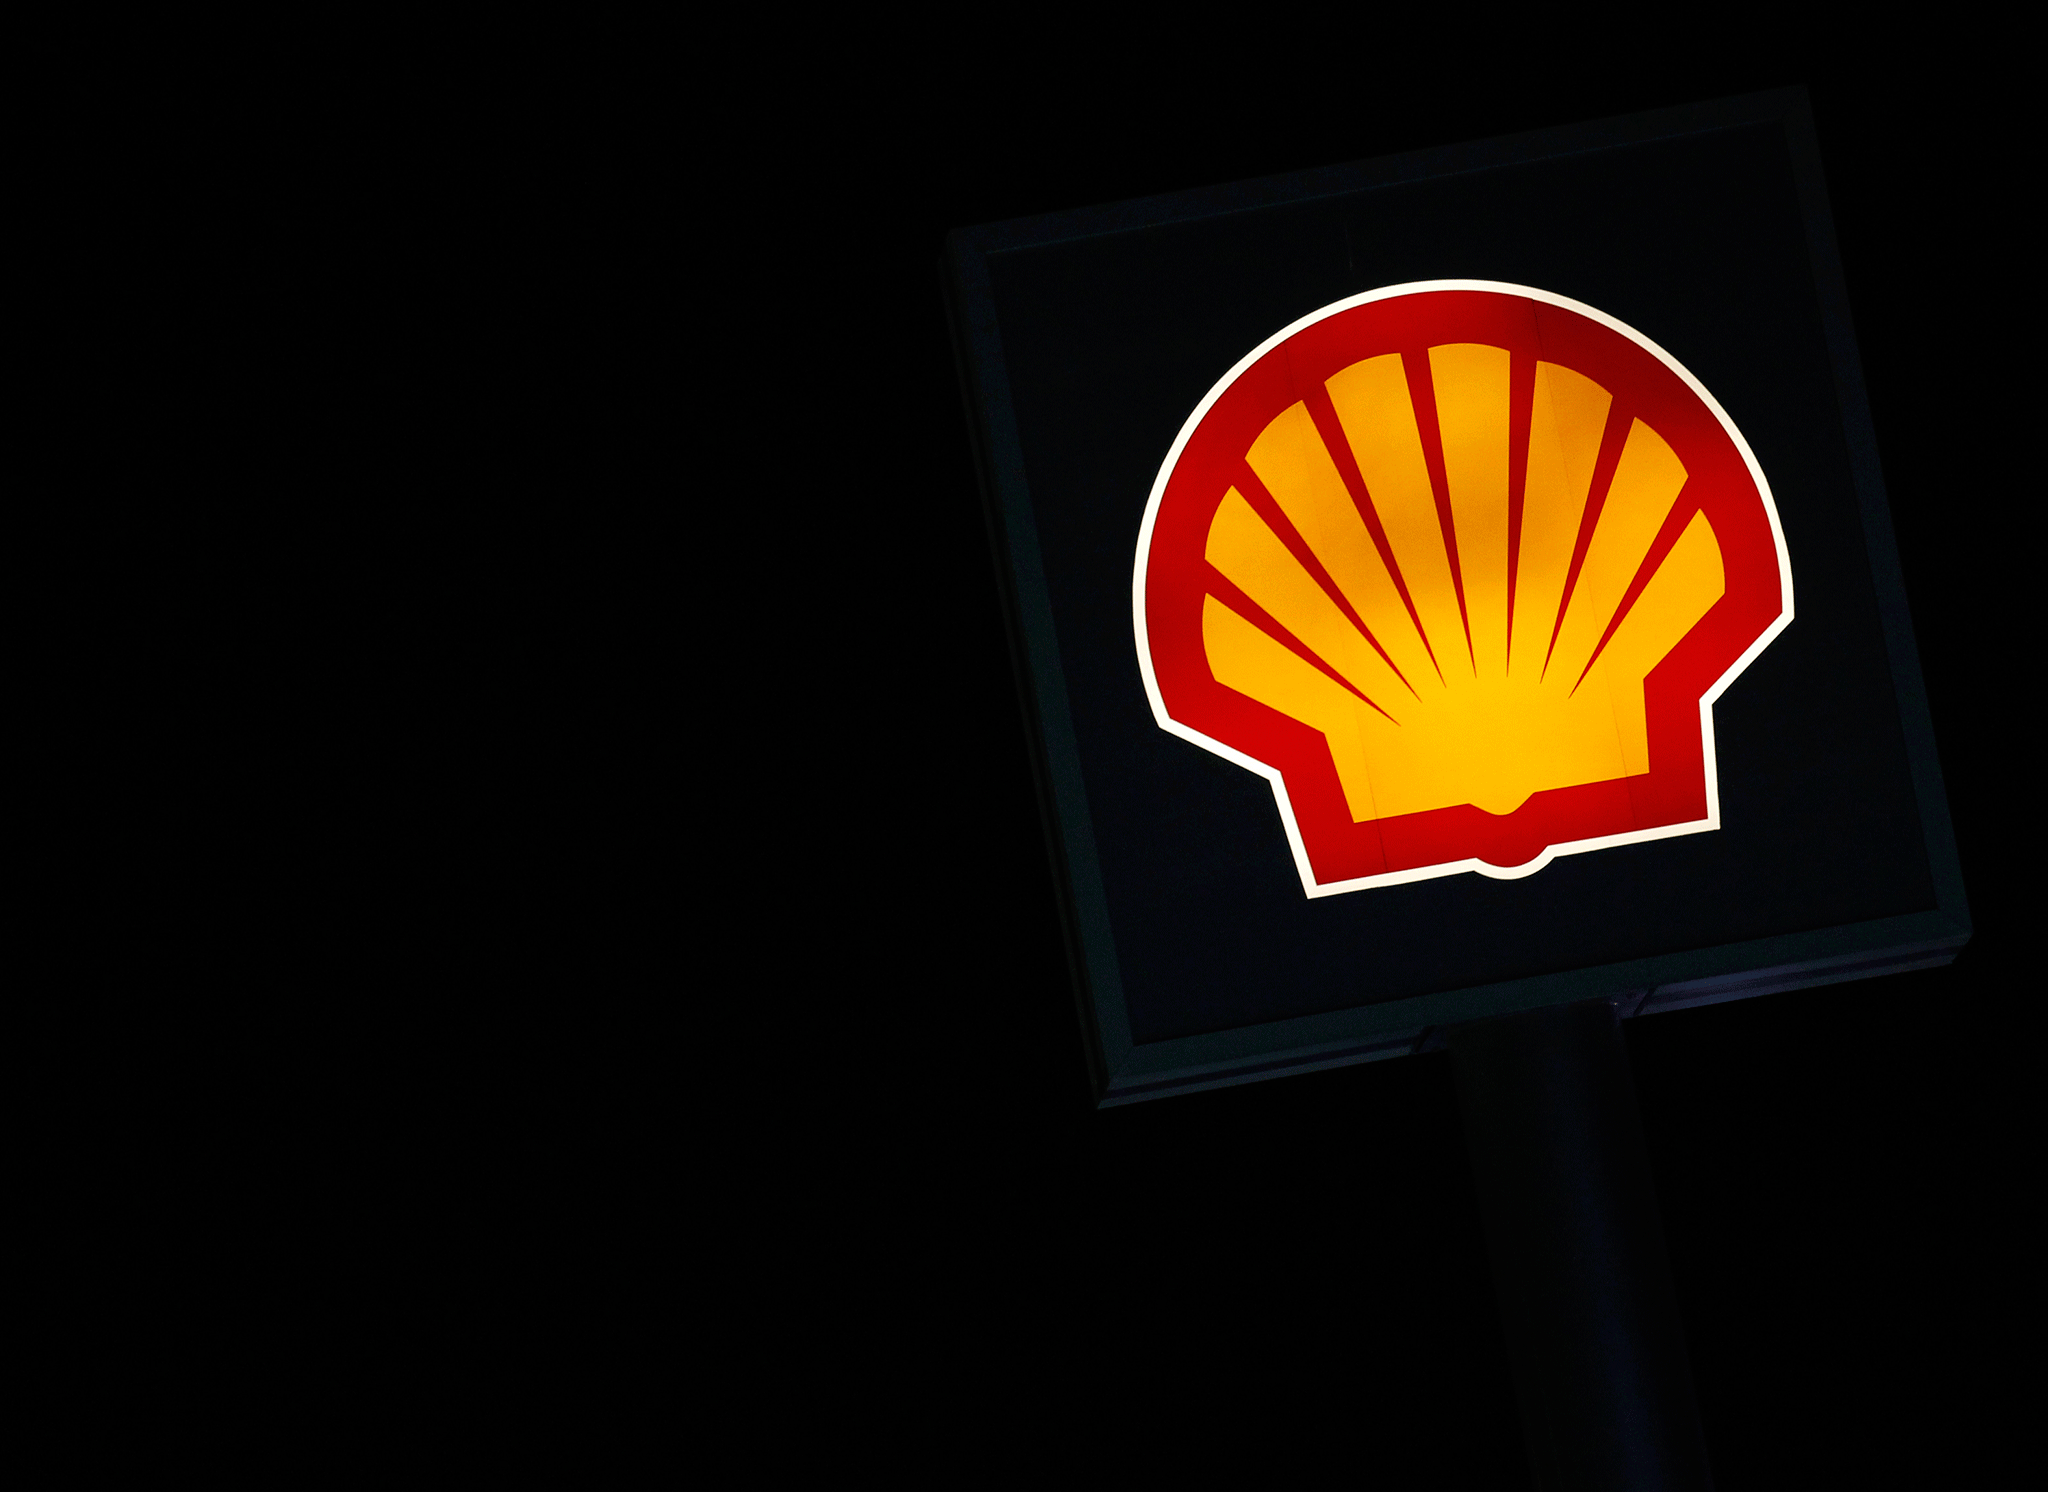 Shell bosses knew cash from $1.3bn deal would go to money-launderer